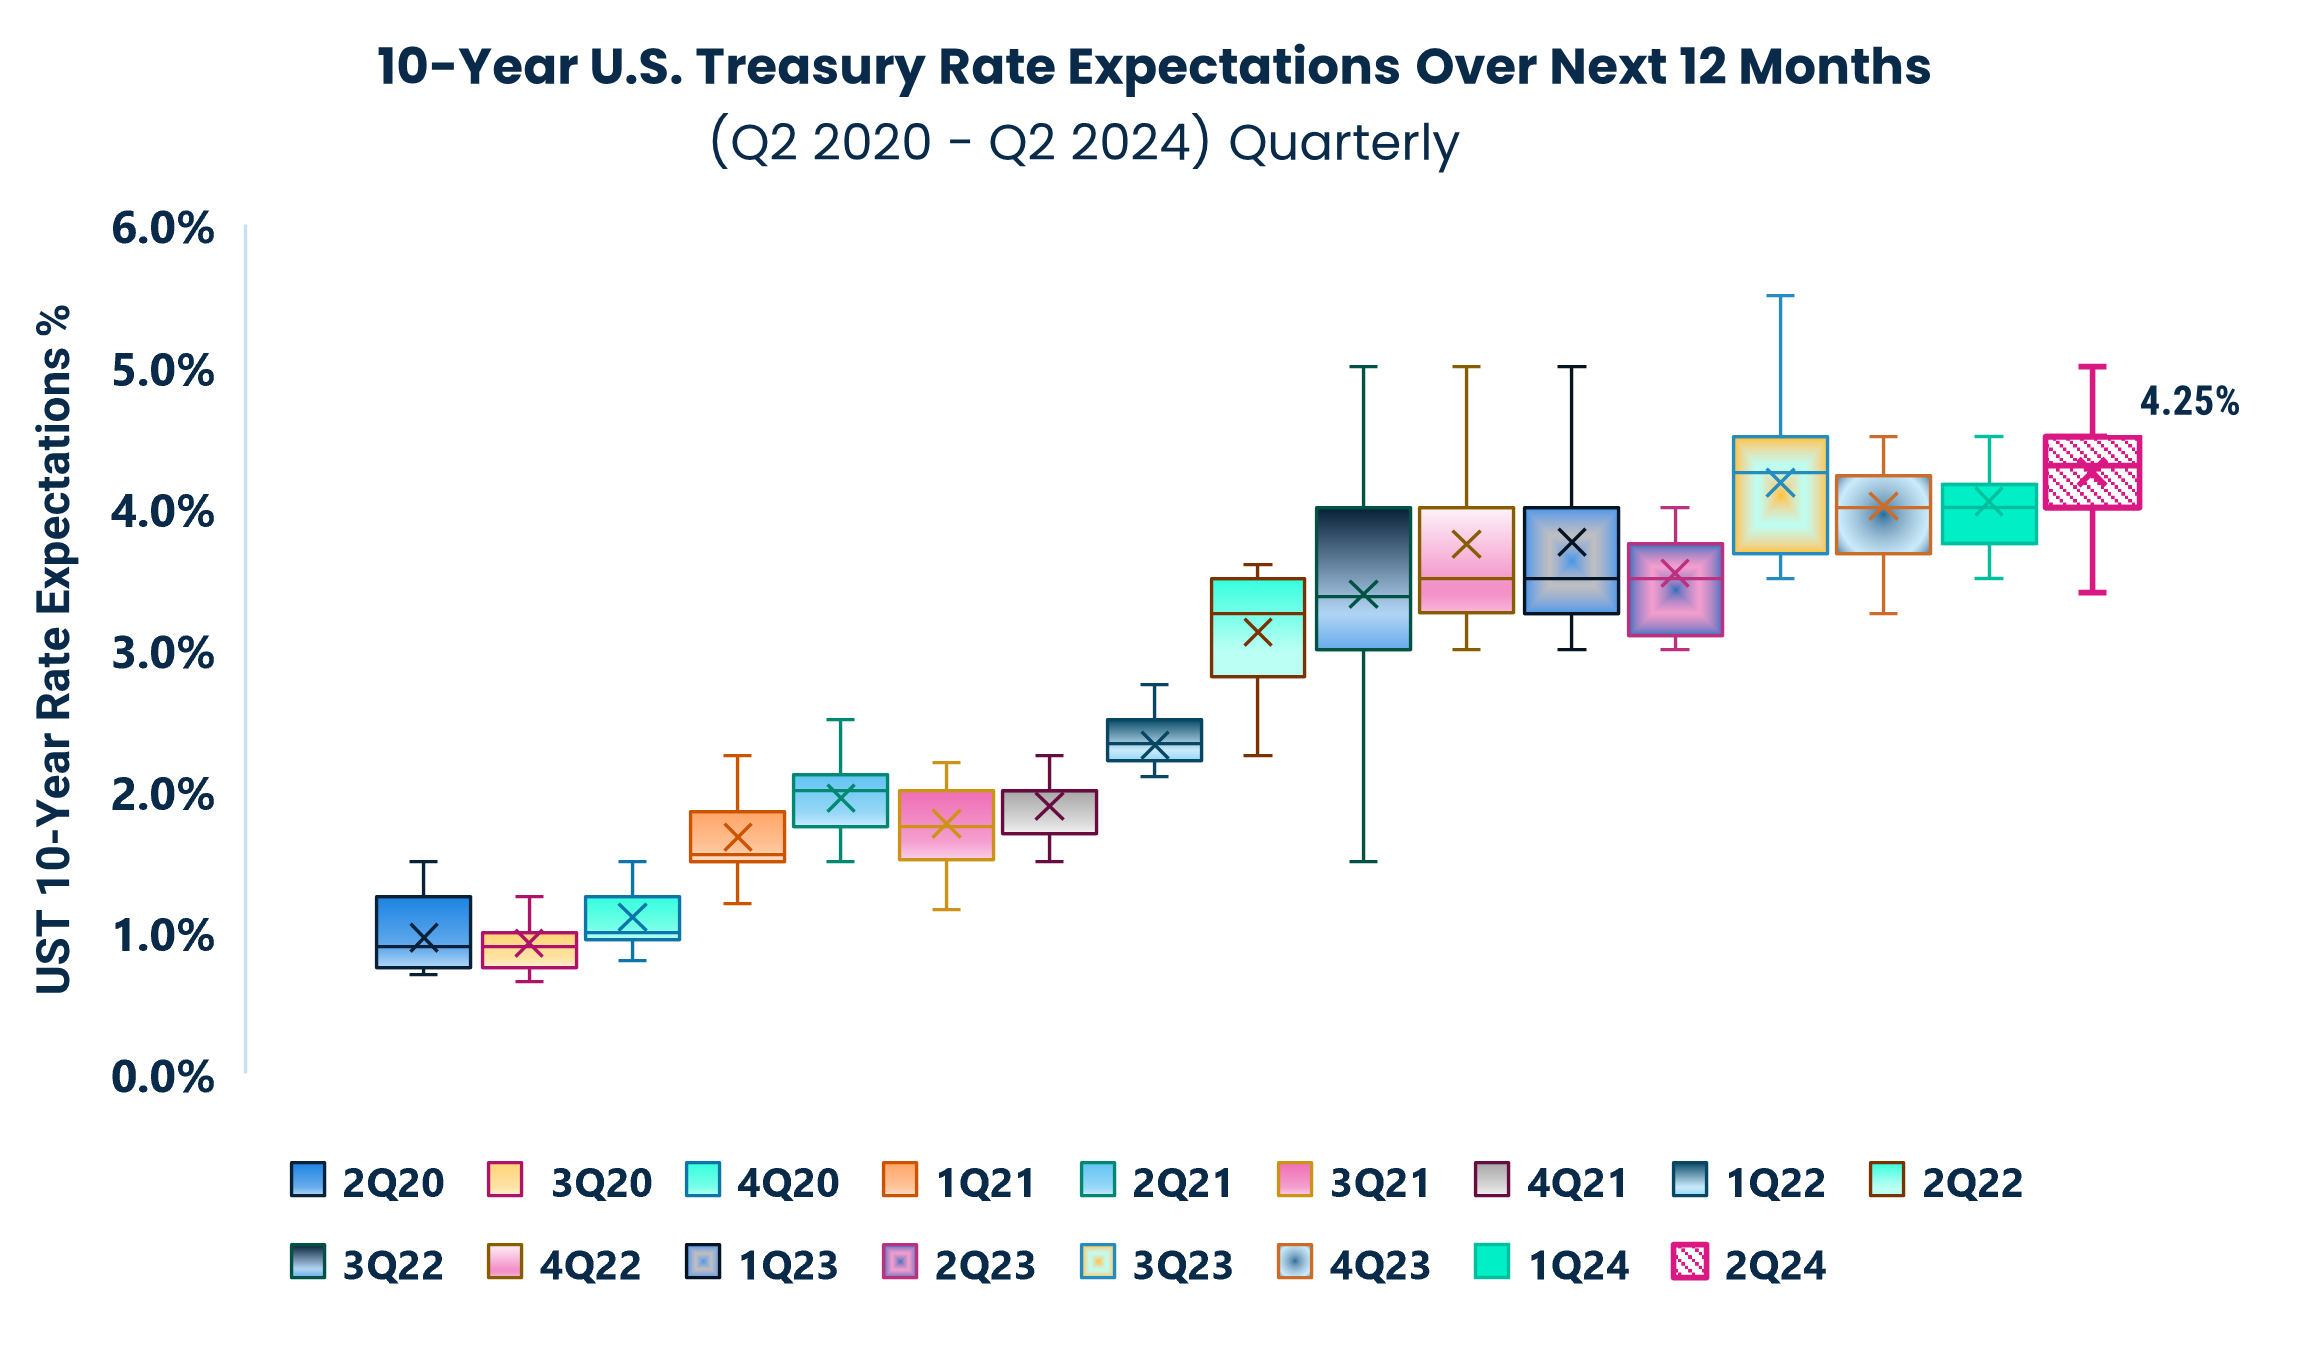 10-Year U.S. Treasury Rate Expectations Over Next 12 Months
	(Q2 2020 - Q2 2024) Quarterly